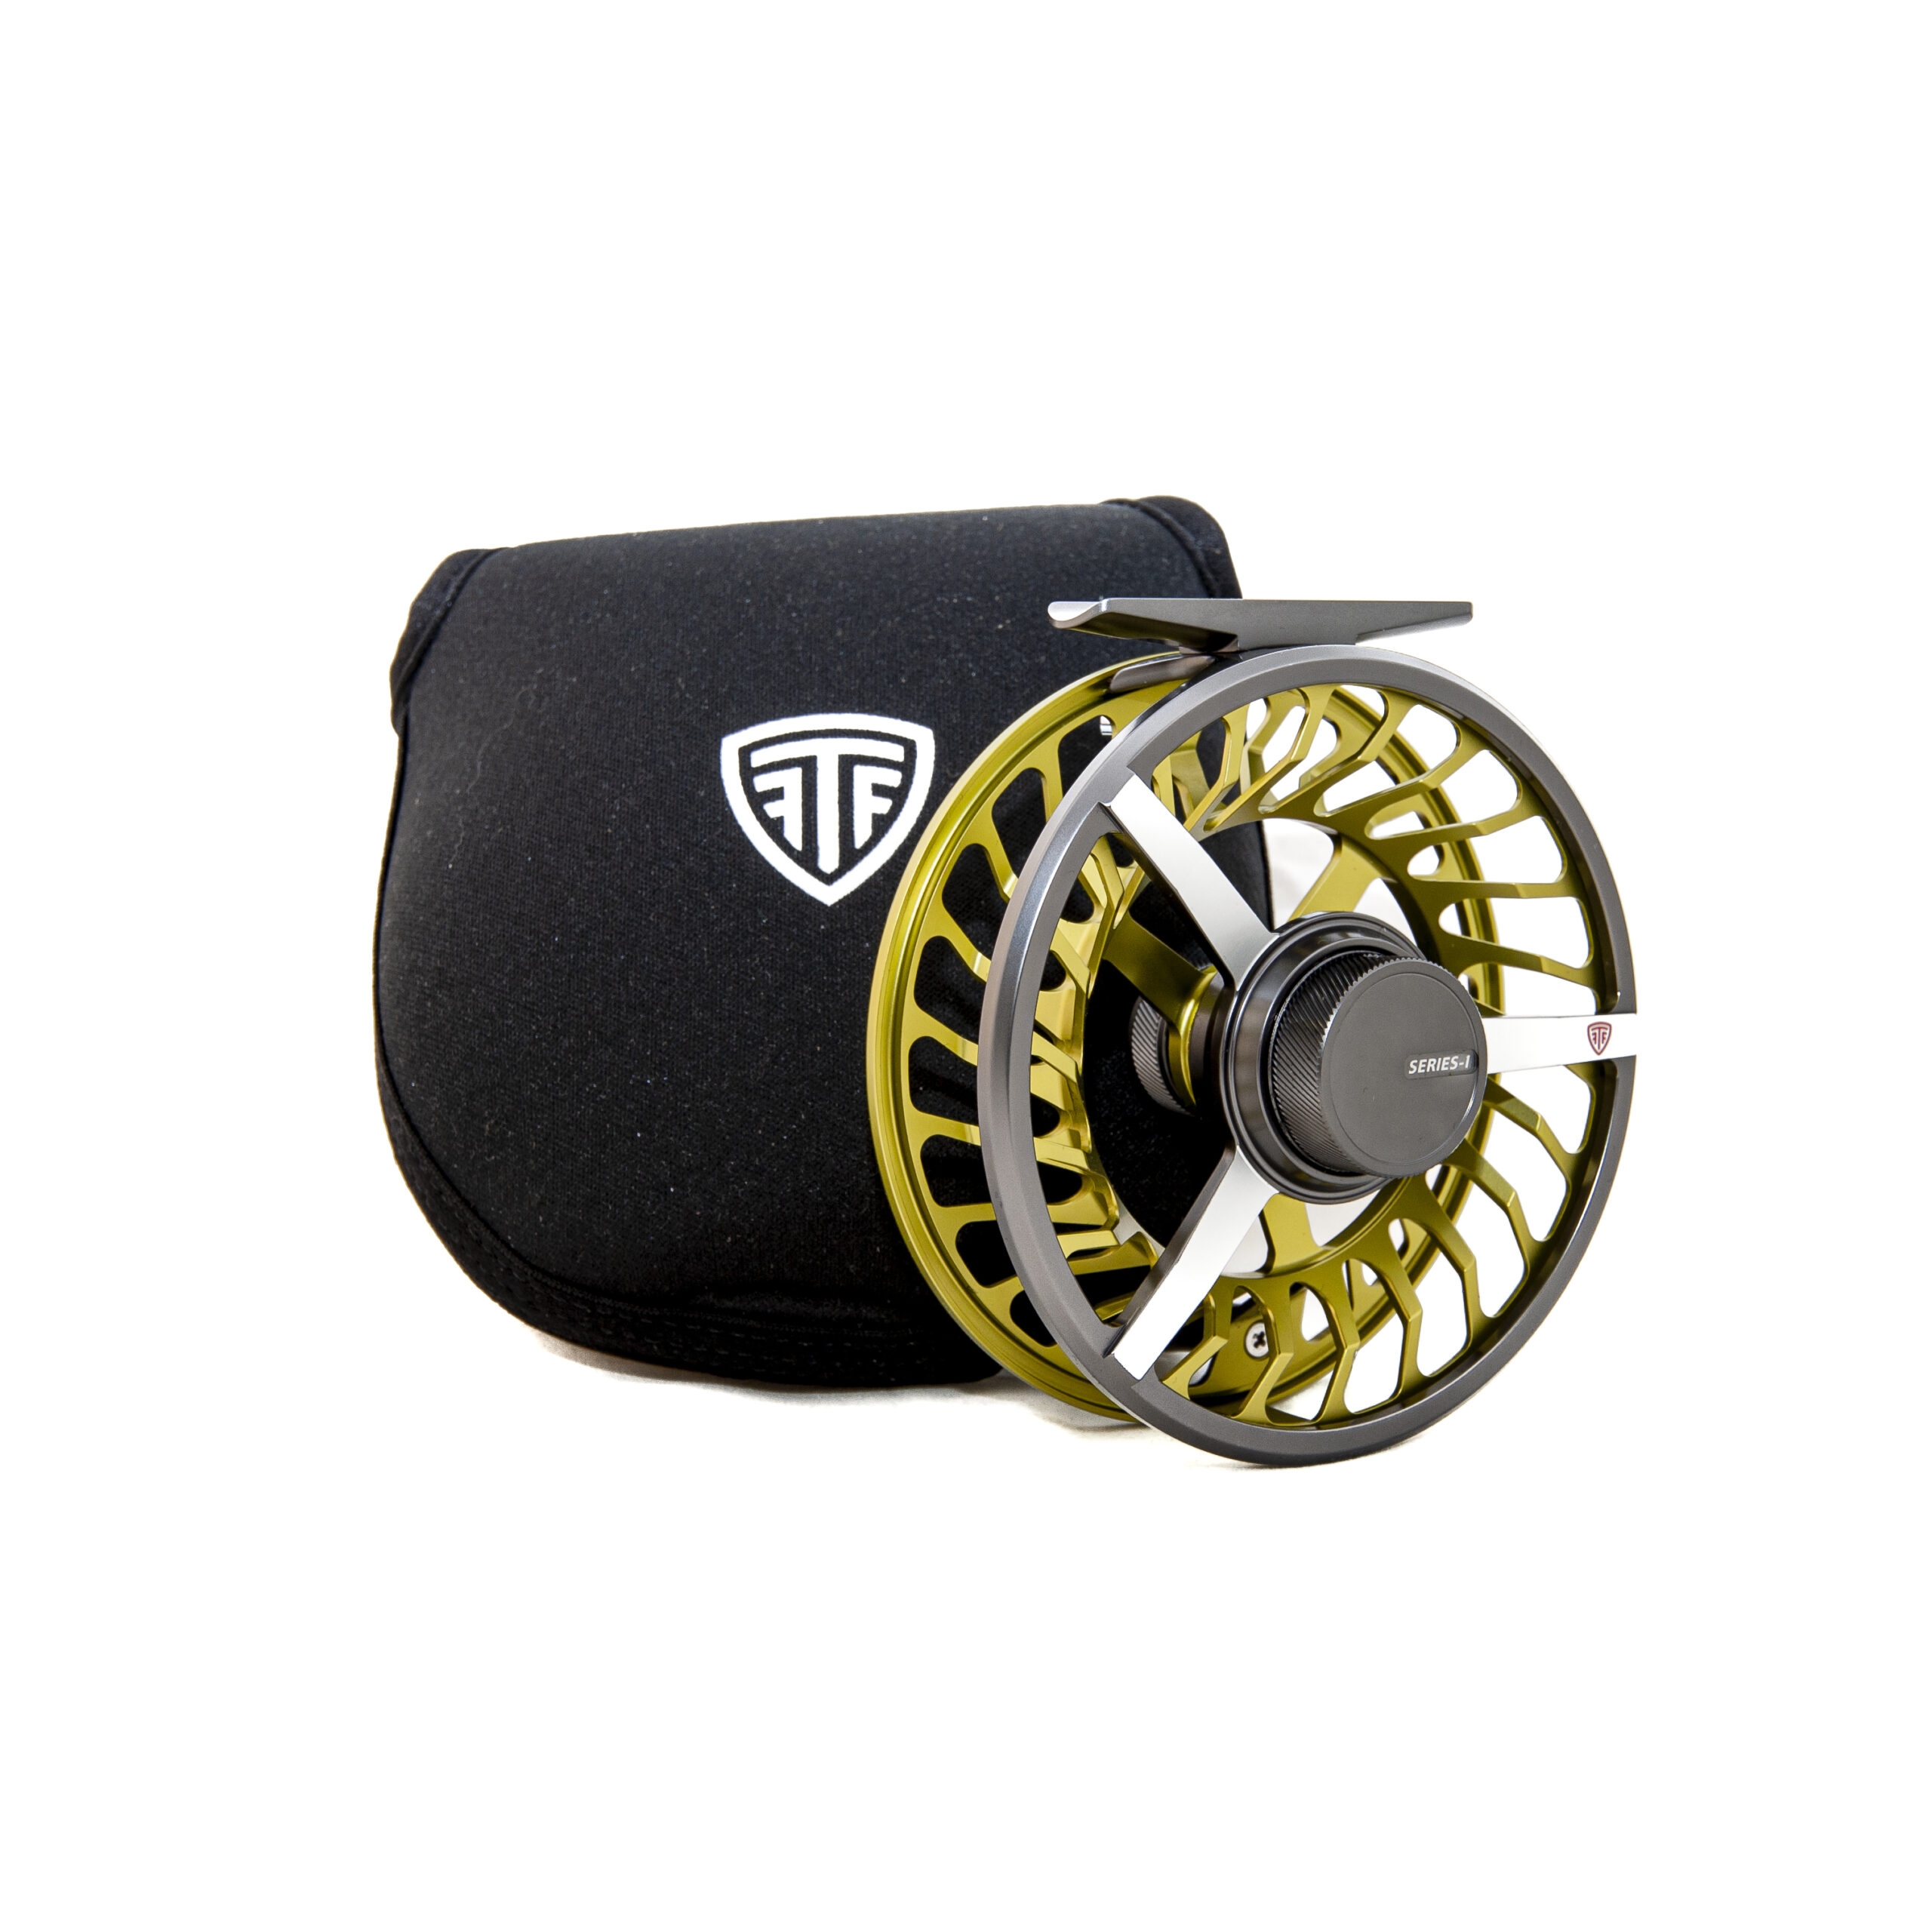 gold fly fishing reel, gold fly fishing reel Suppliers and Manufacturers at